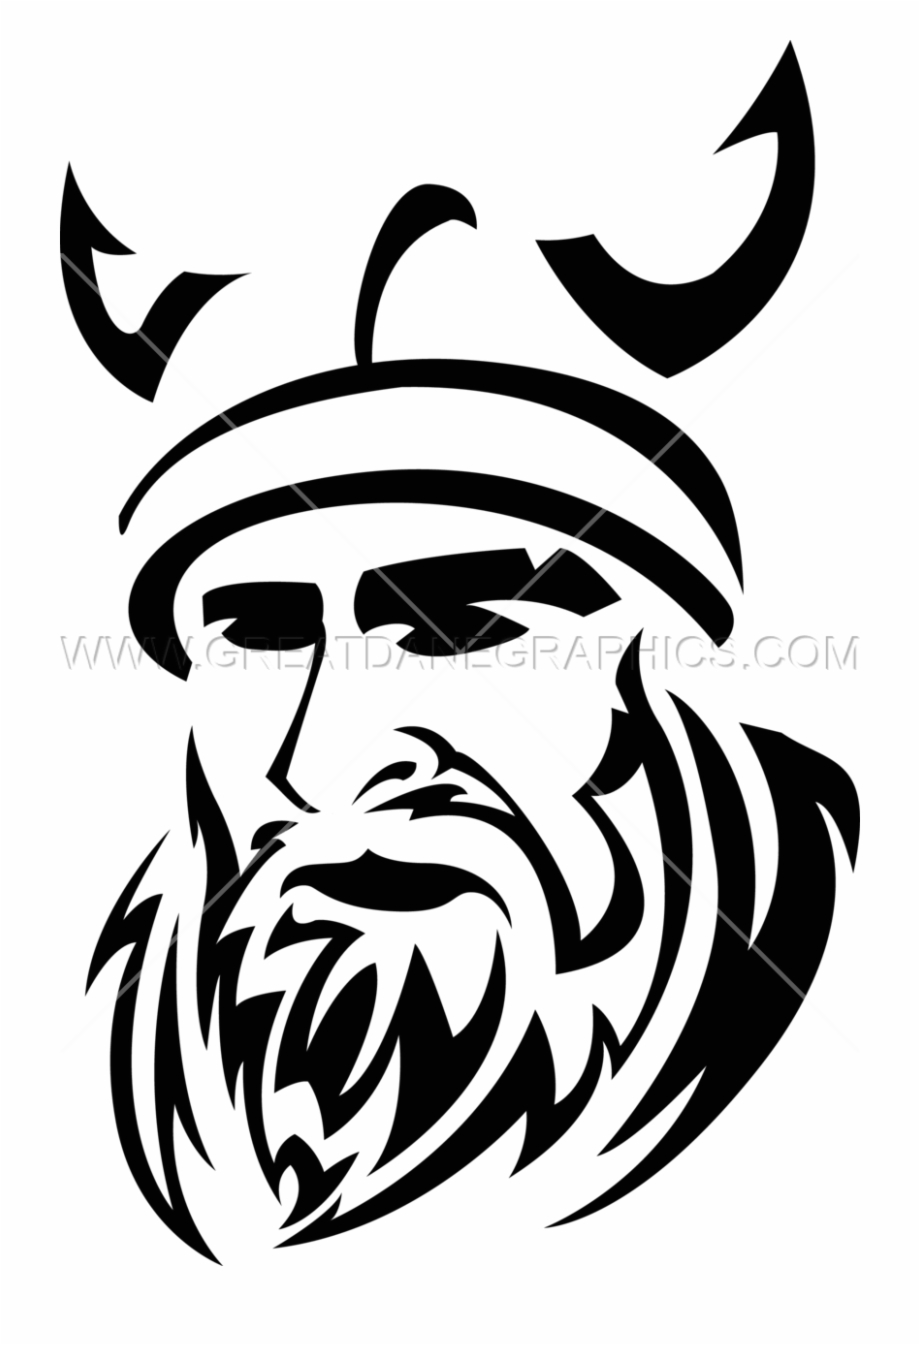 Free Viking Clipart Black And White, Download Free Viking Clipart Black